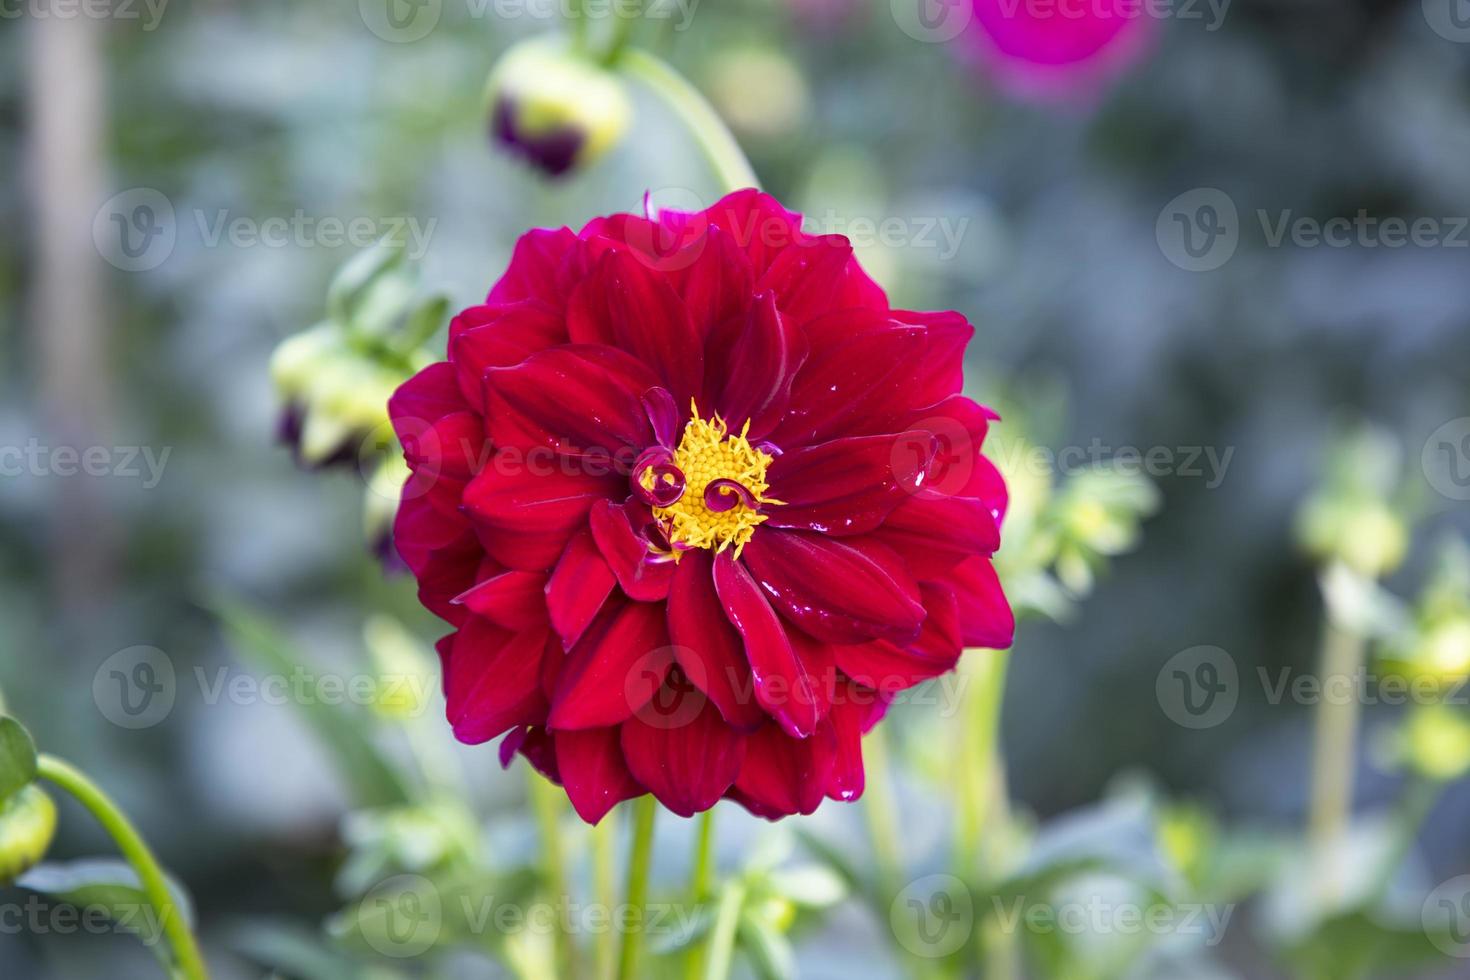 Beautiful  Blooming  Colorful  Dahlia Flower in the Garden Tree photo